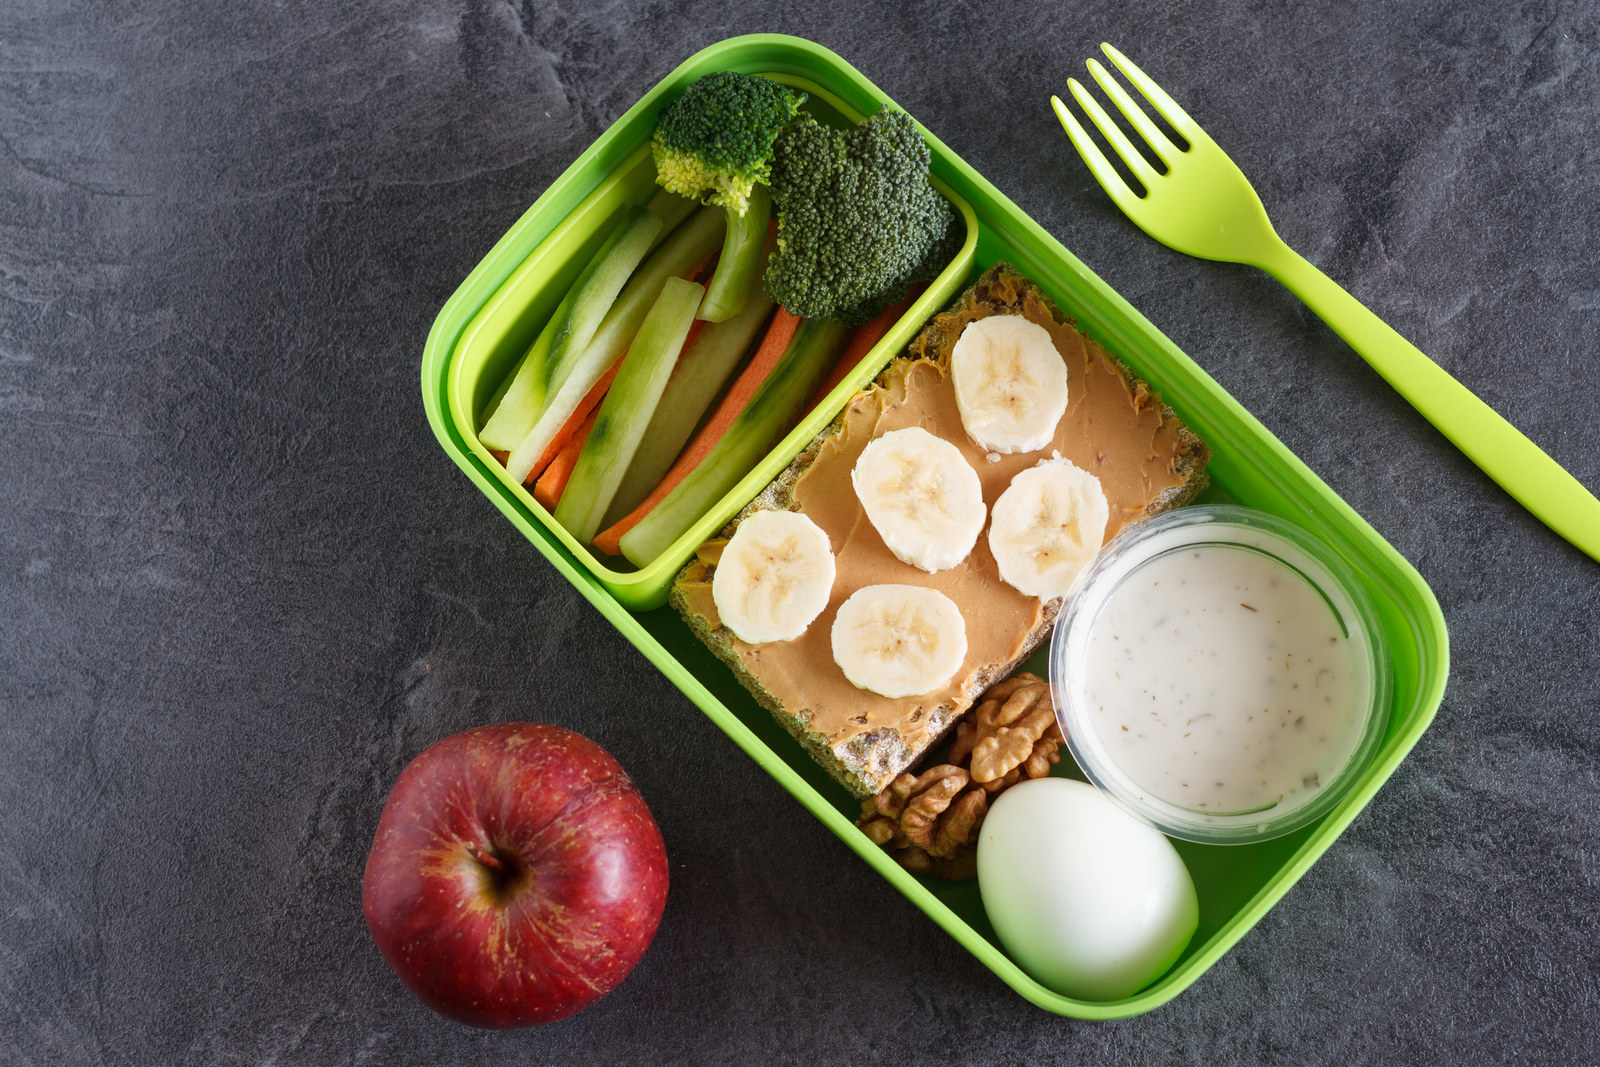 An open lunchbox containing a peanut butter sandwich, hard-boiled egg, and raw veggies with an apple on the side